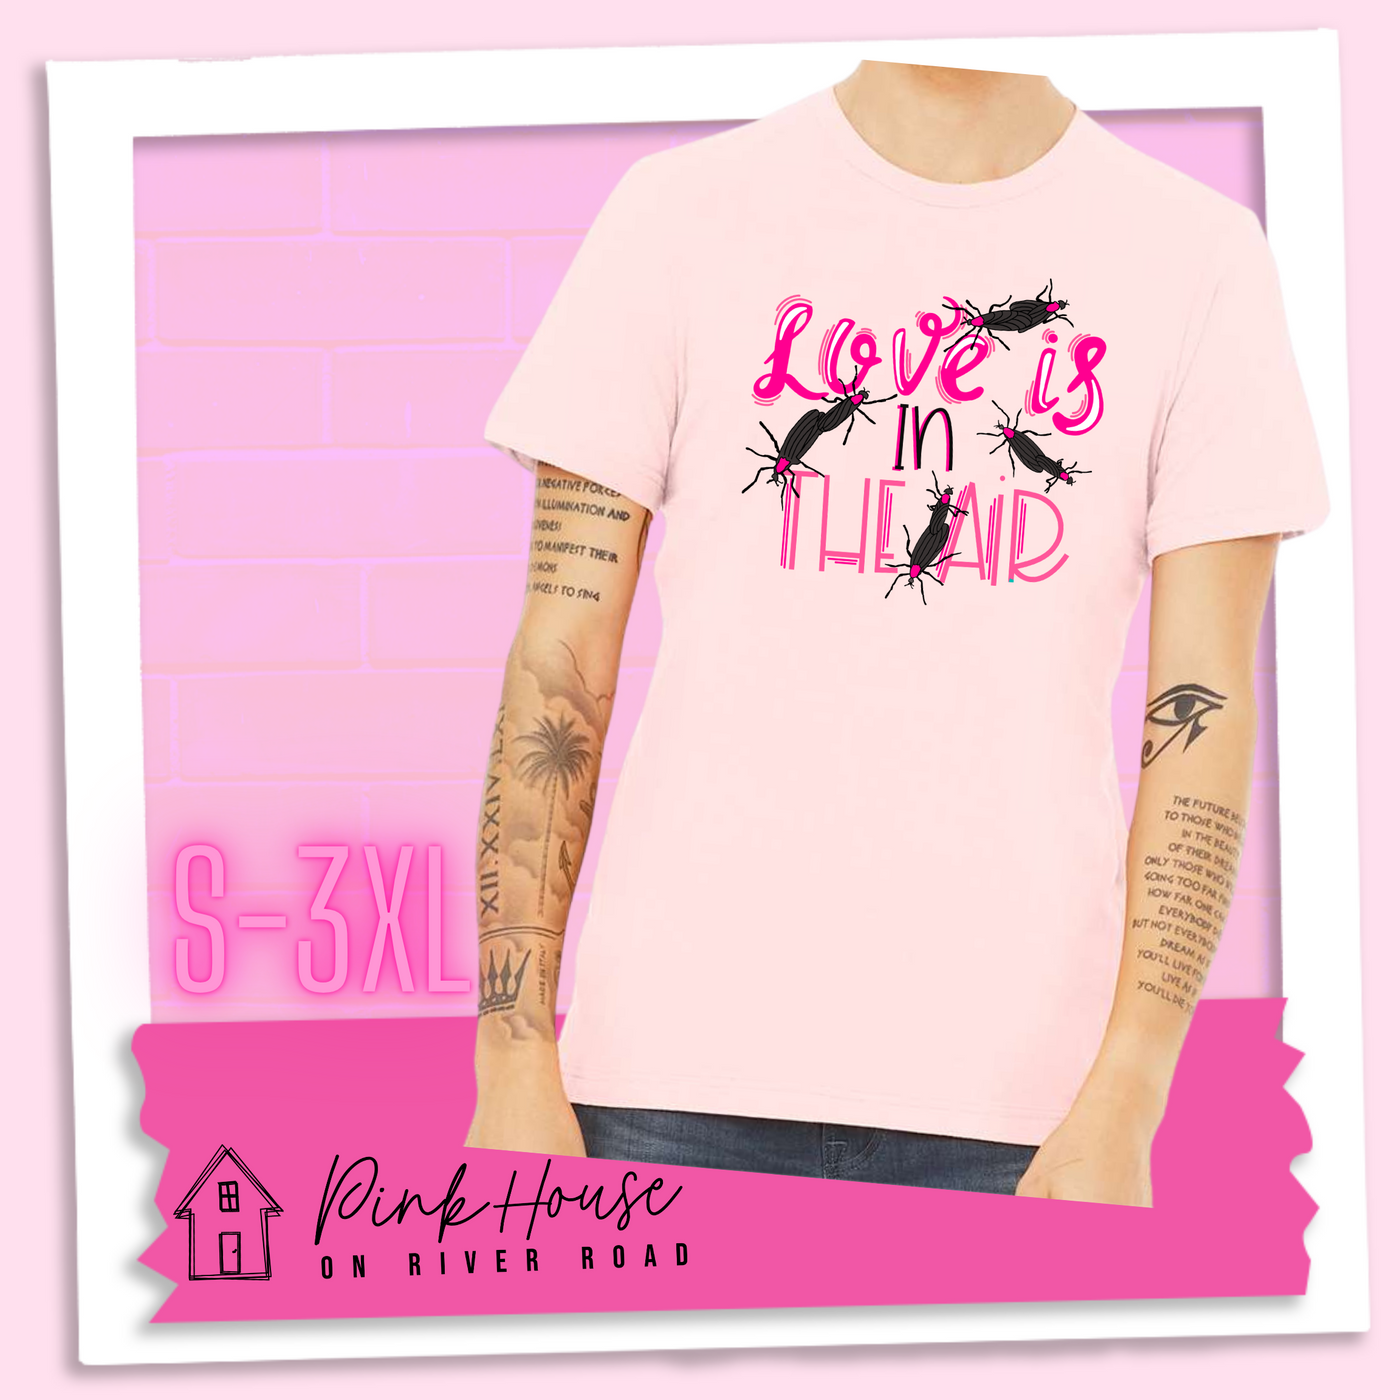 Soft PInk Tee with Graphic. Graphic says " Love Is in the Air". "Love Is" is a hot pink cursive font with white highlights and hot pink accent lines underneath is the word "In" Is it in a black font with a hot pink highlight. on the bottom is "The Air" in Light pink with light pink accent lines. There are also black flying bugs with hot pink spots behind their heads